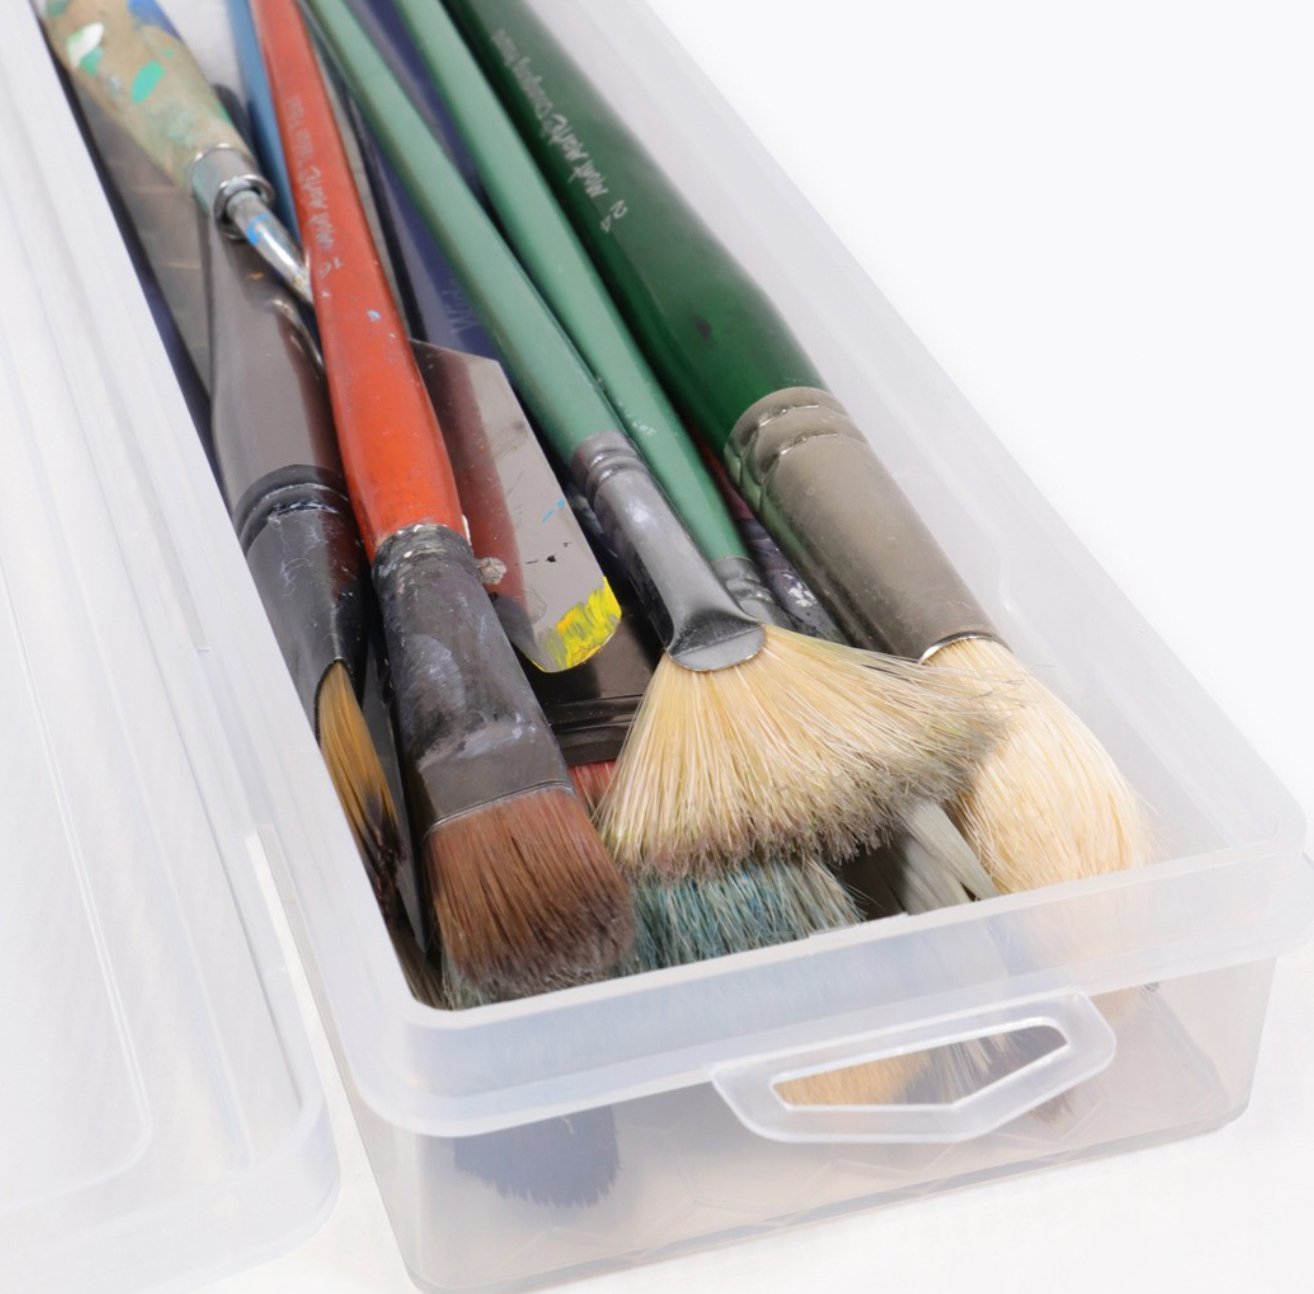 Acrylic paint brushes for beginners - Handy Mandy Craft Store